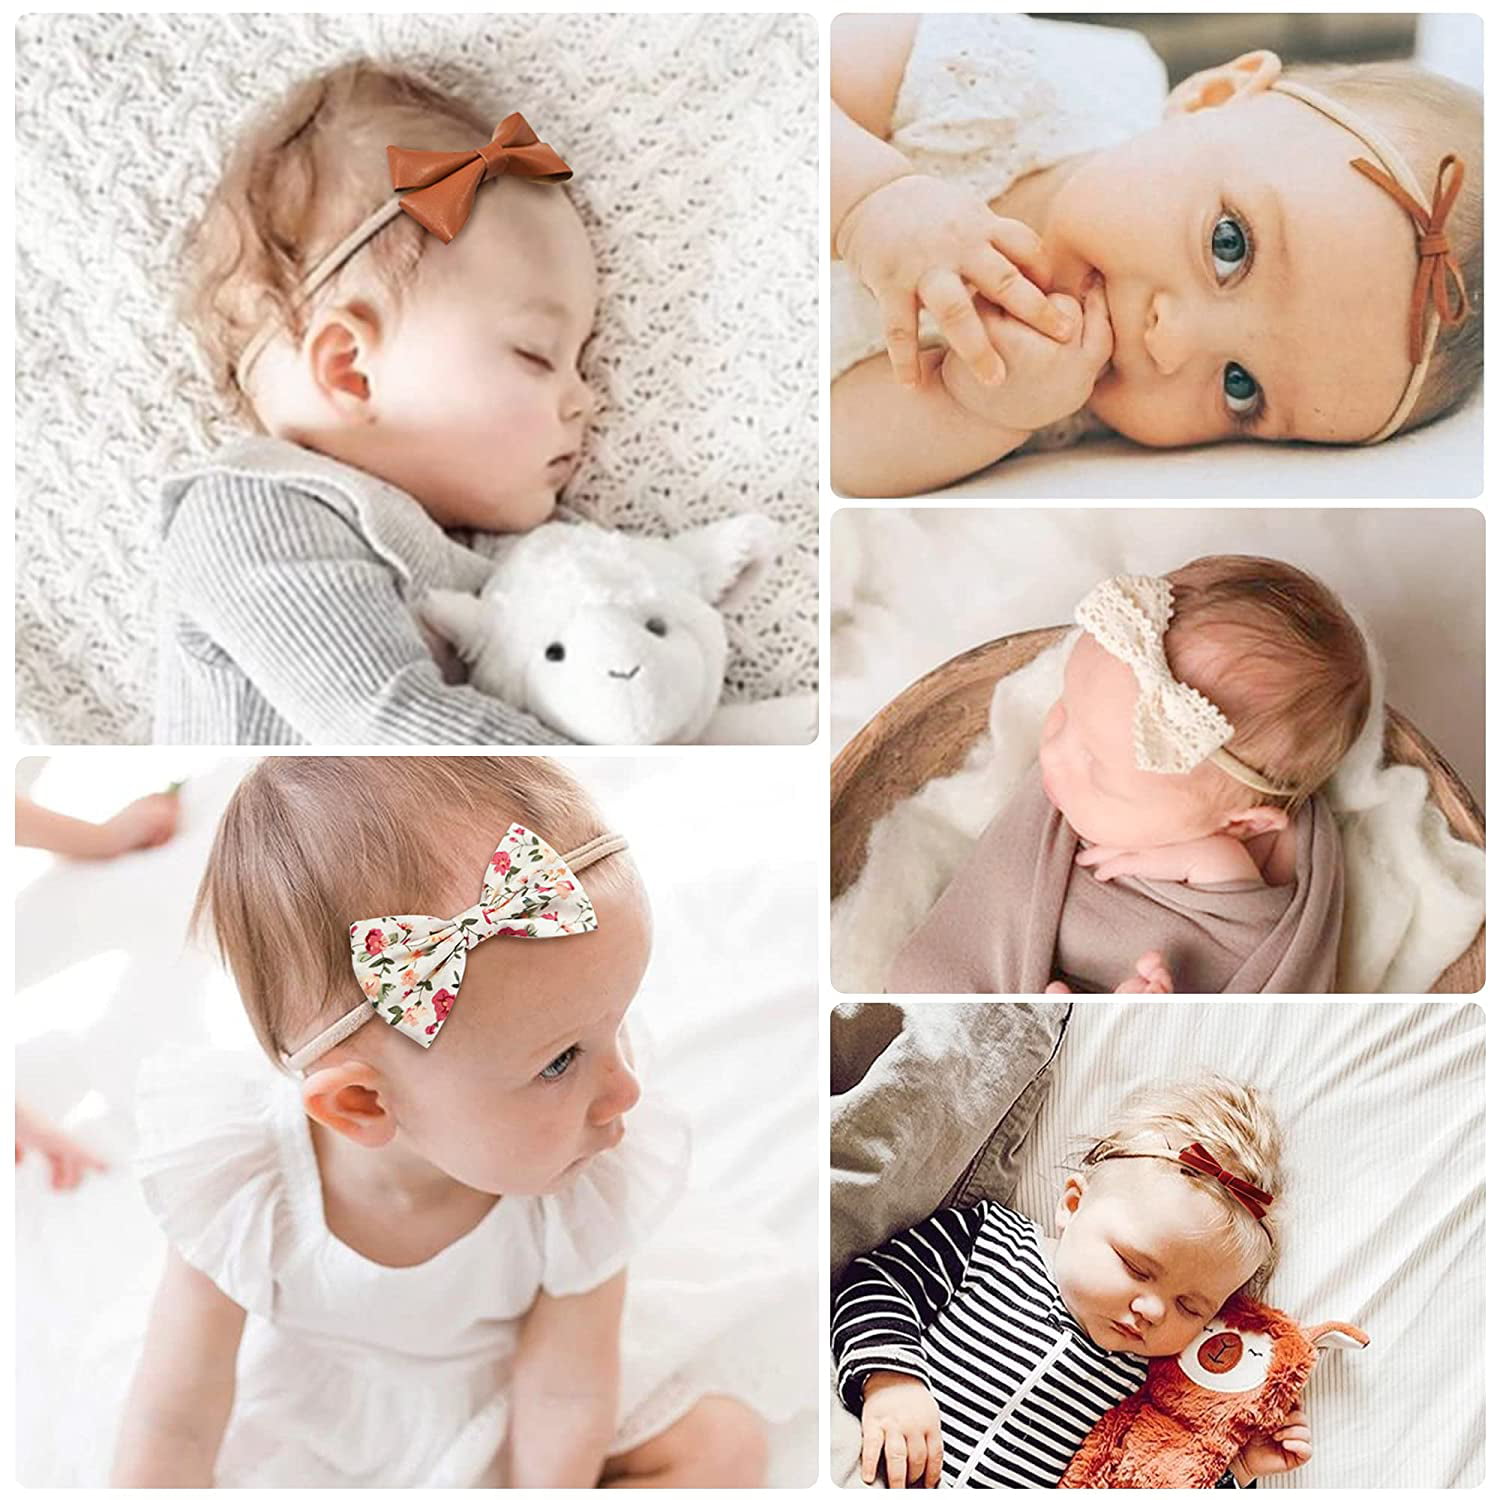 15 PCS Baby Girls Headbands and Bows Hairbands Soft Nylon Elastics Handmade Hair Accessories for Newborn Babies Infant Toddlers Kids 